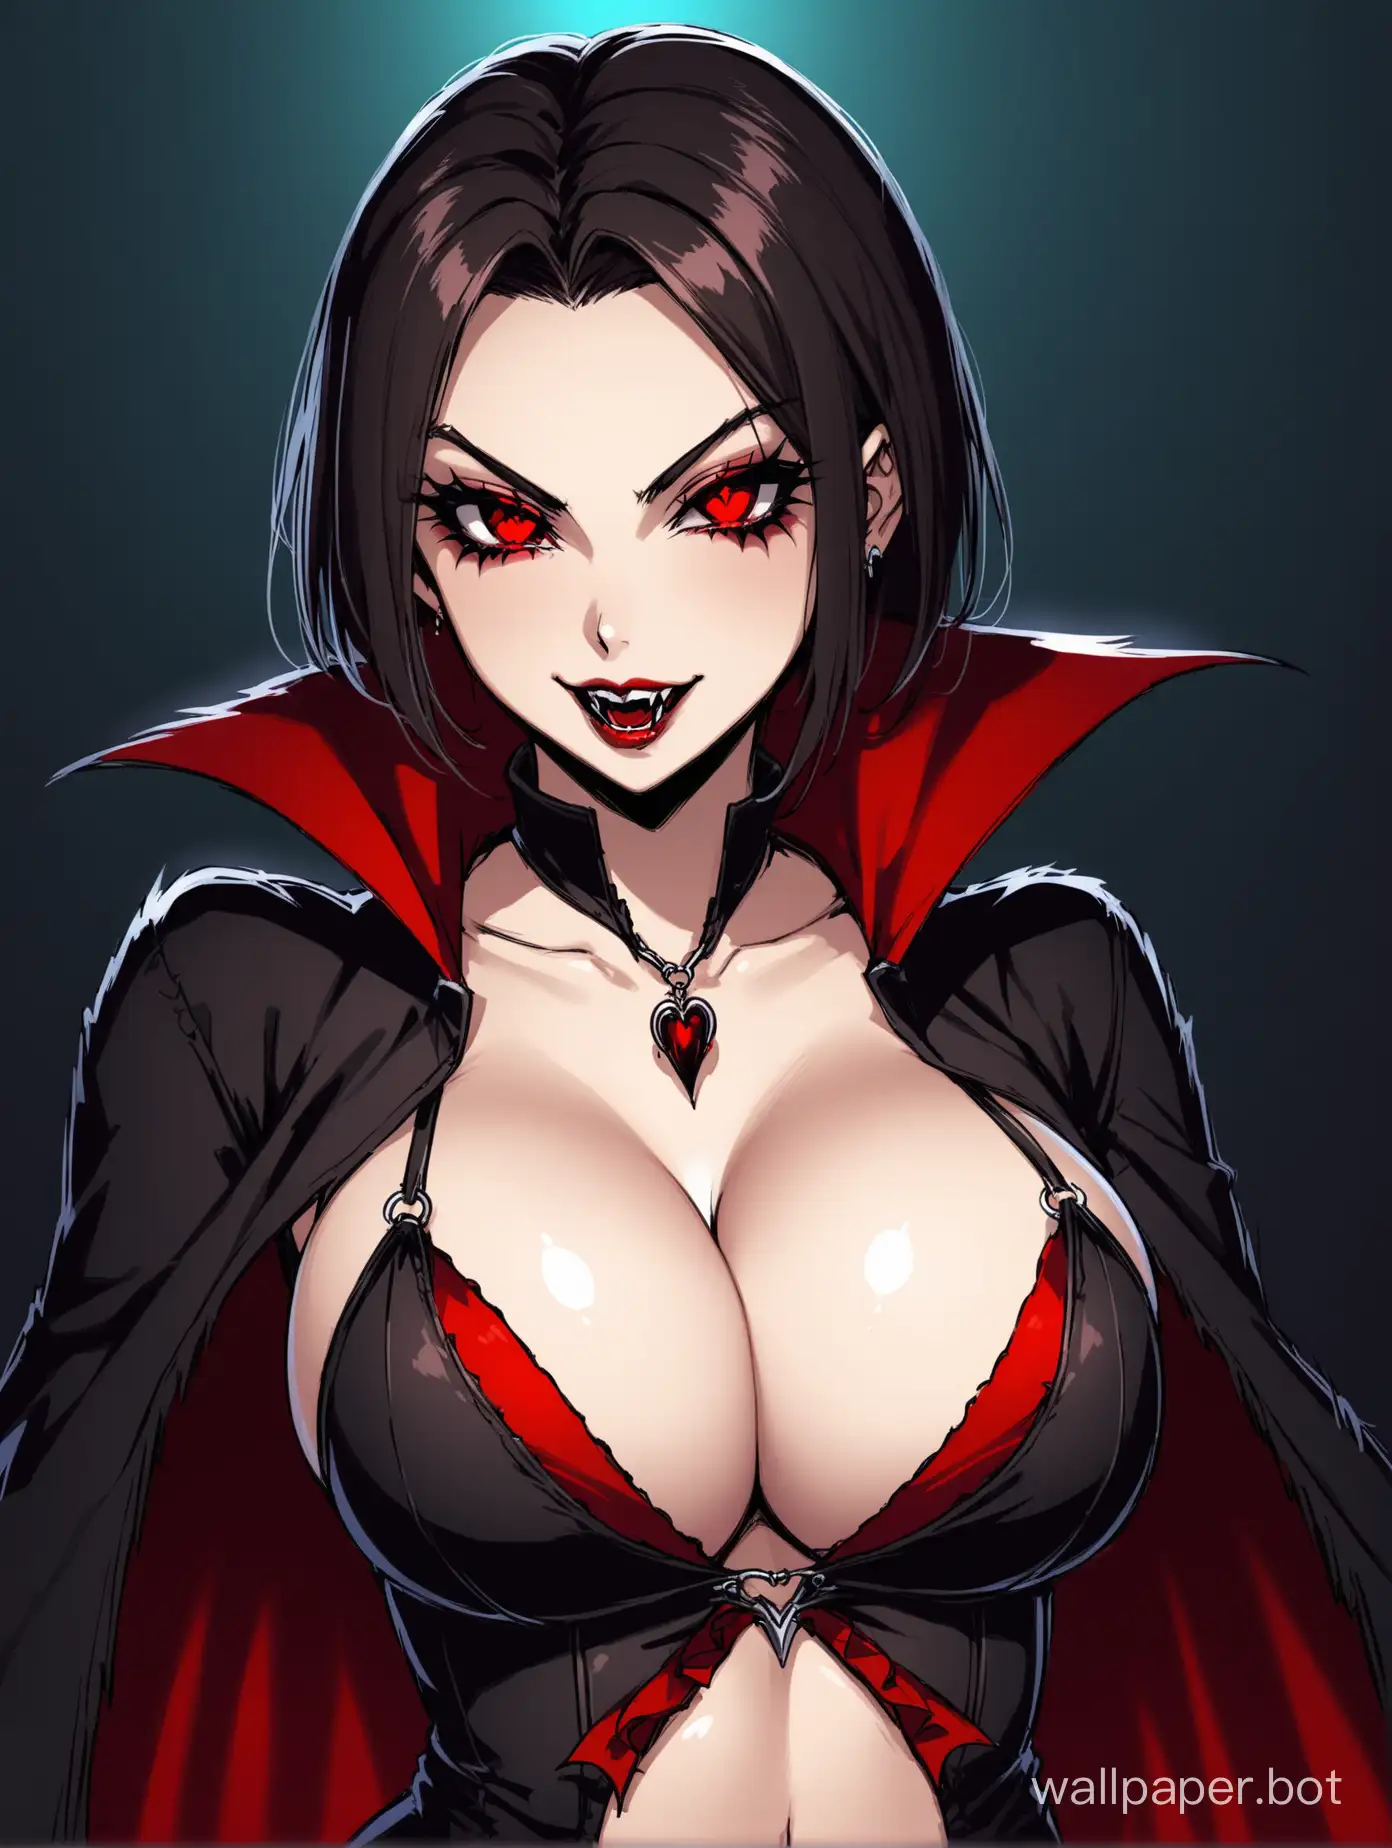 Sexy female vampire with big boobs wearing deep cleavage.